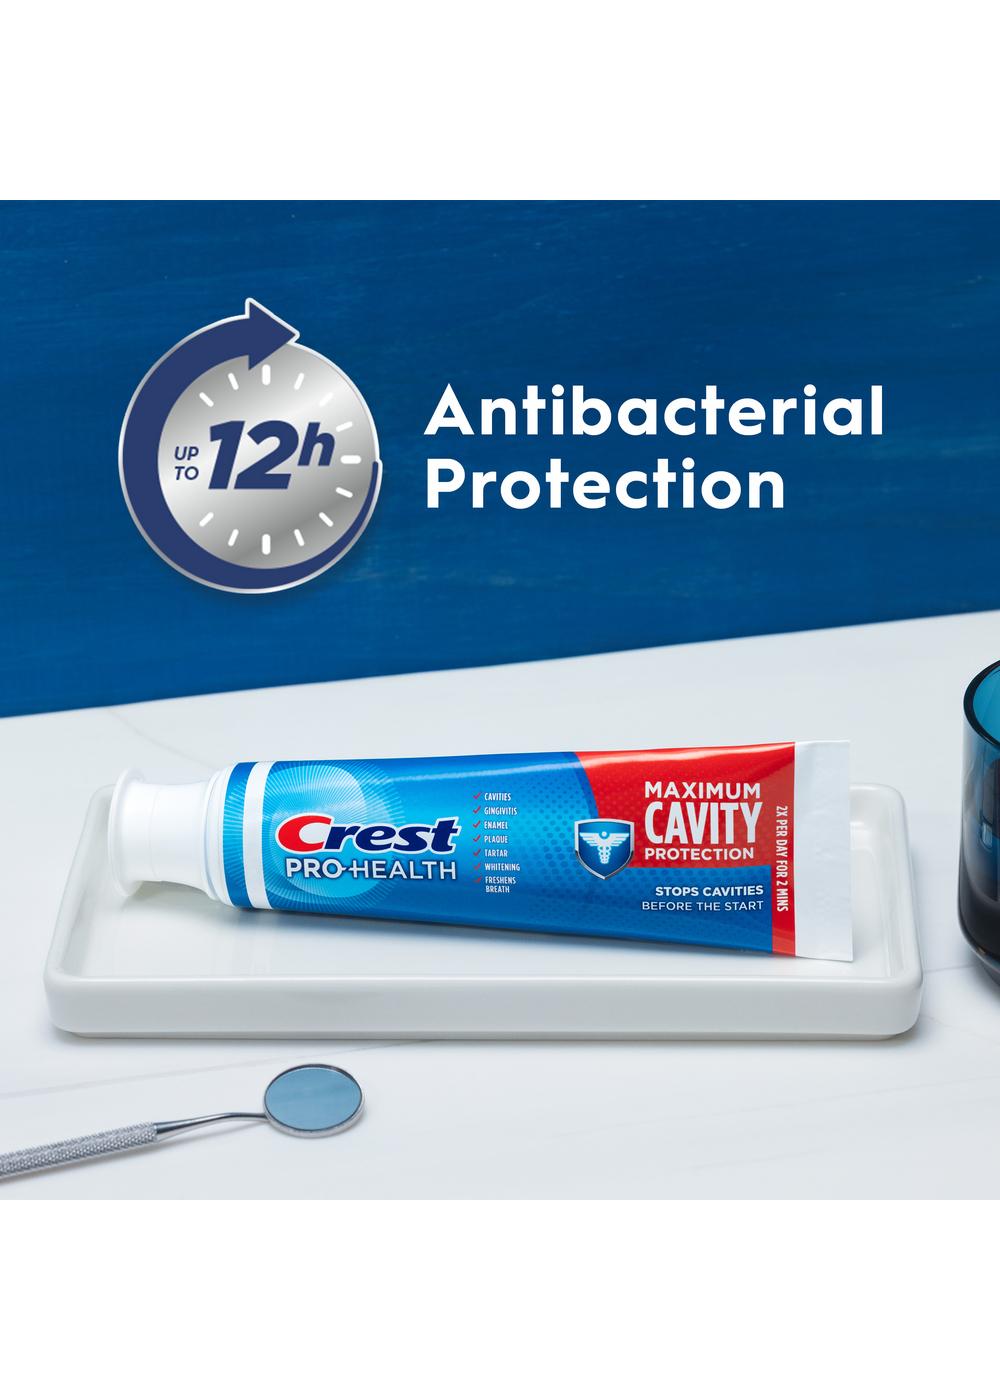 Crest Pro-Health Maximum Cavity Protection Toothpaste; image 4 of 9